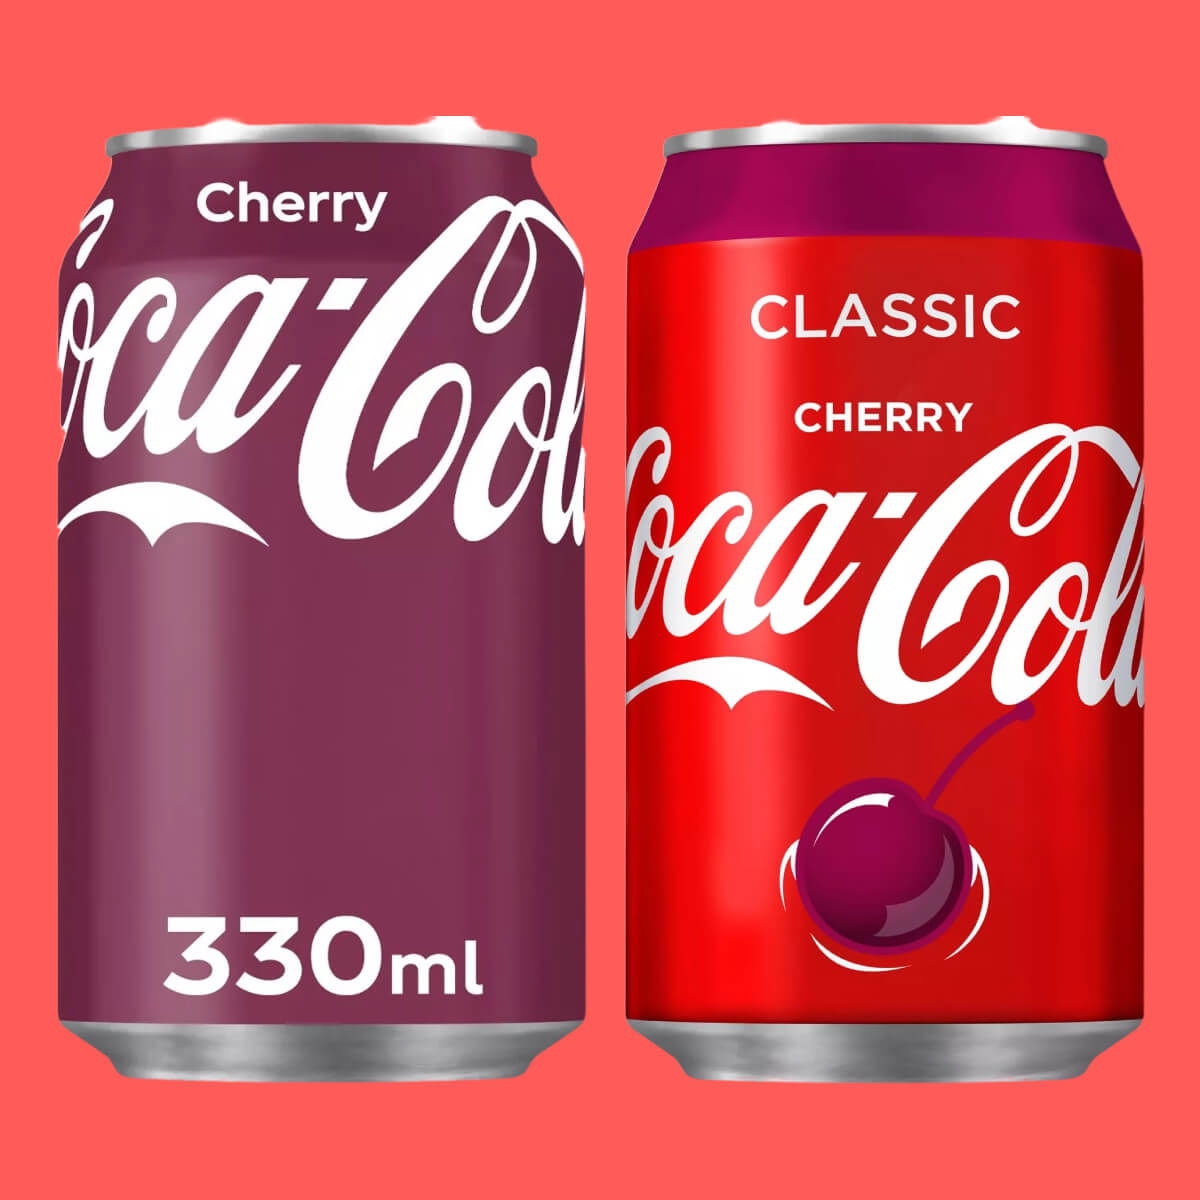 Cherry Coca Cola and Classic Cherry Coke cans from 2024